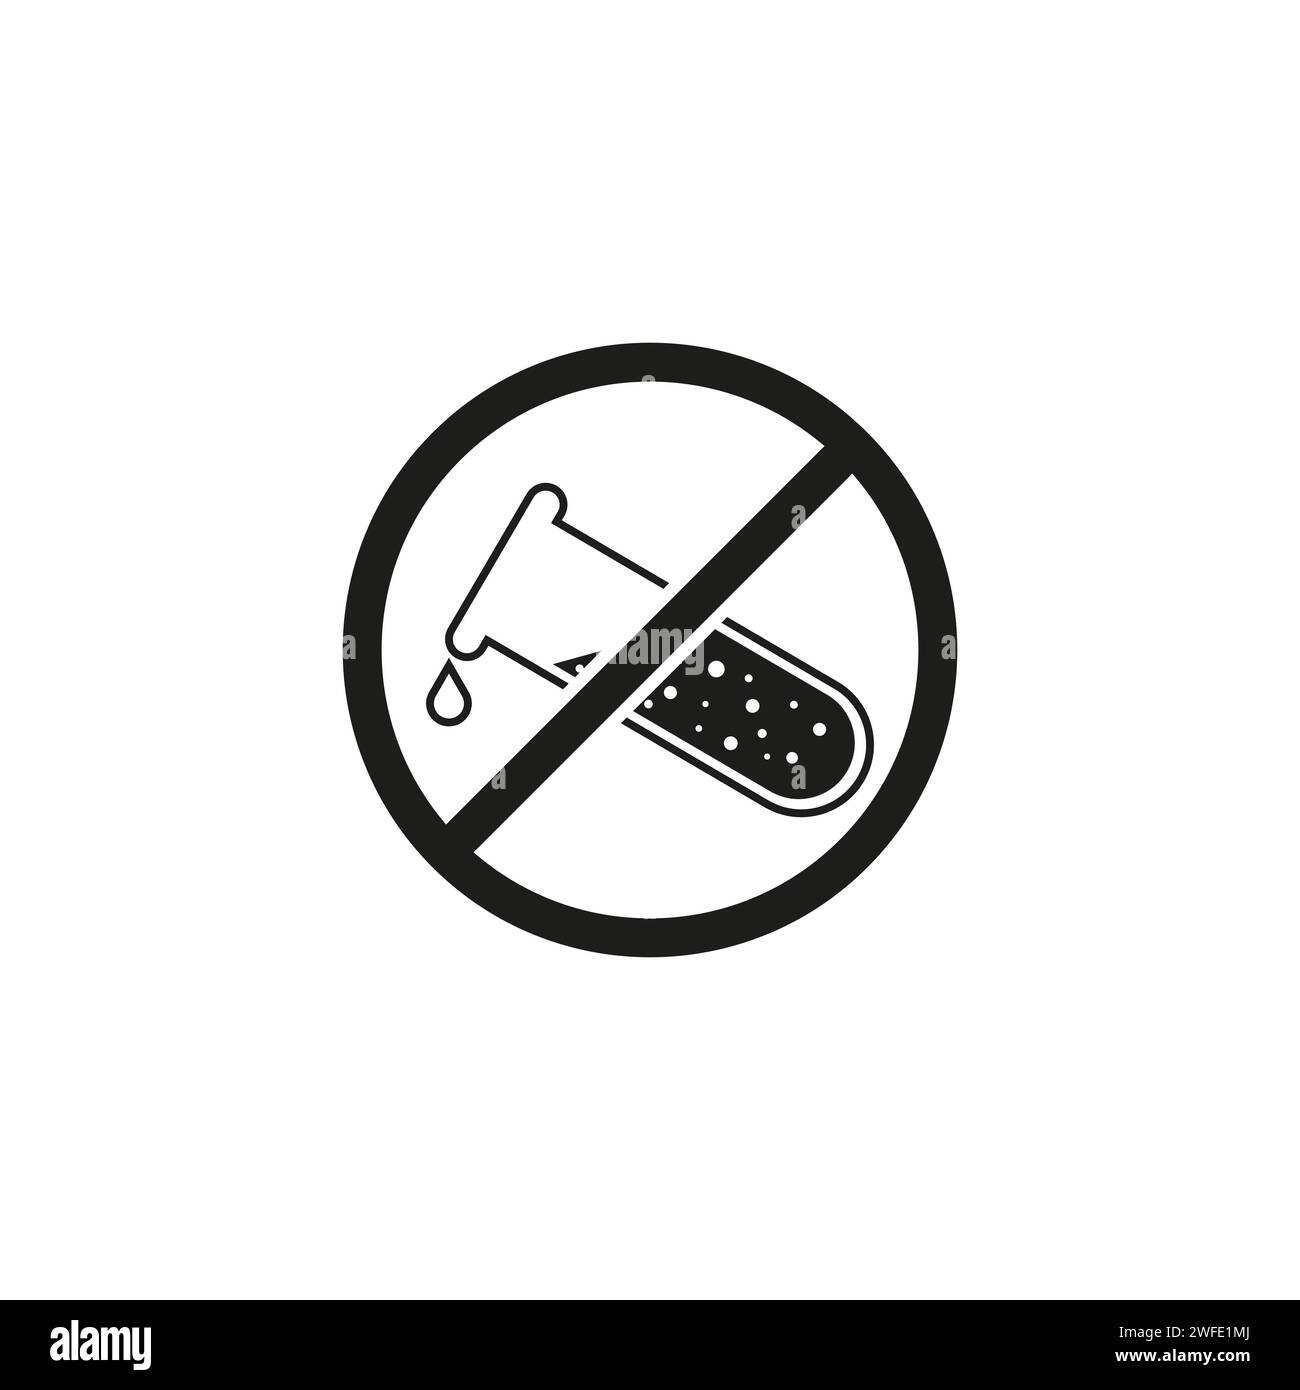 Forbidden signal chemical tube icon. Chemicals forbidden symbol icon. Vector illustration. stock image. EPS 10. Stock Vector